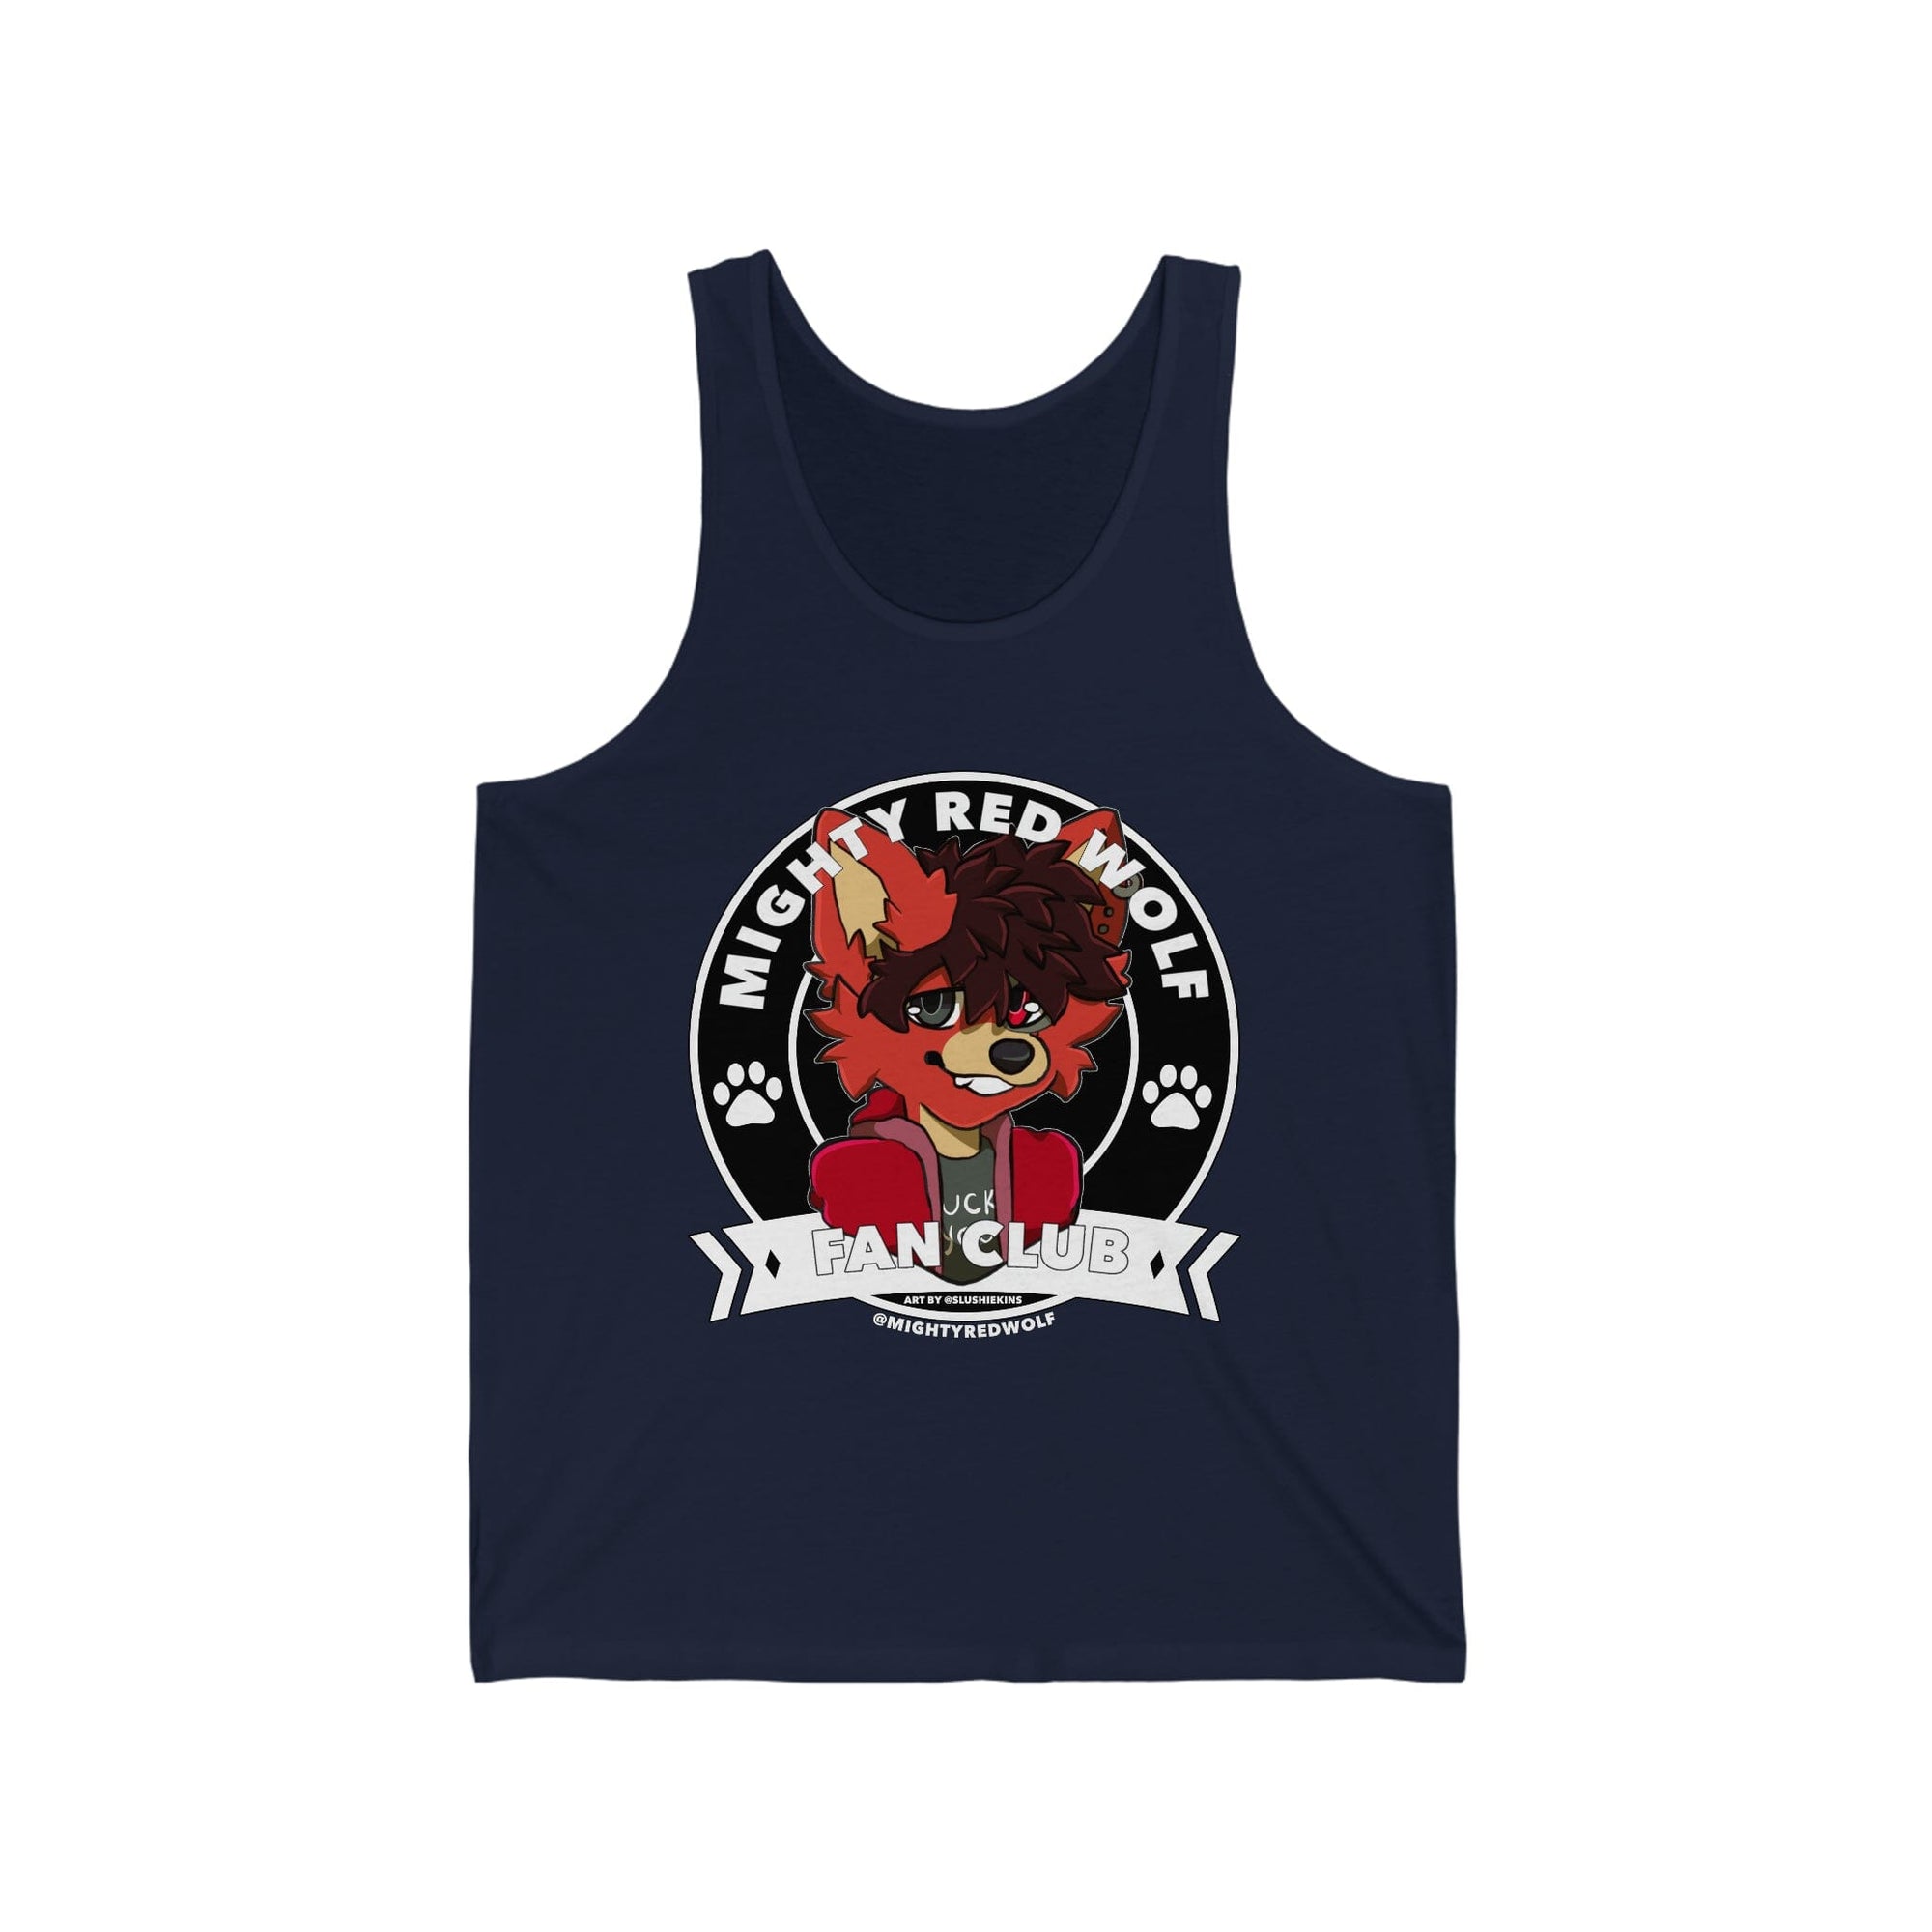 MRW Fanclub - Tank Top Tank Top AFLT-Mighty-Red Navy Blue XS 